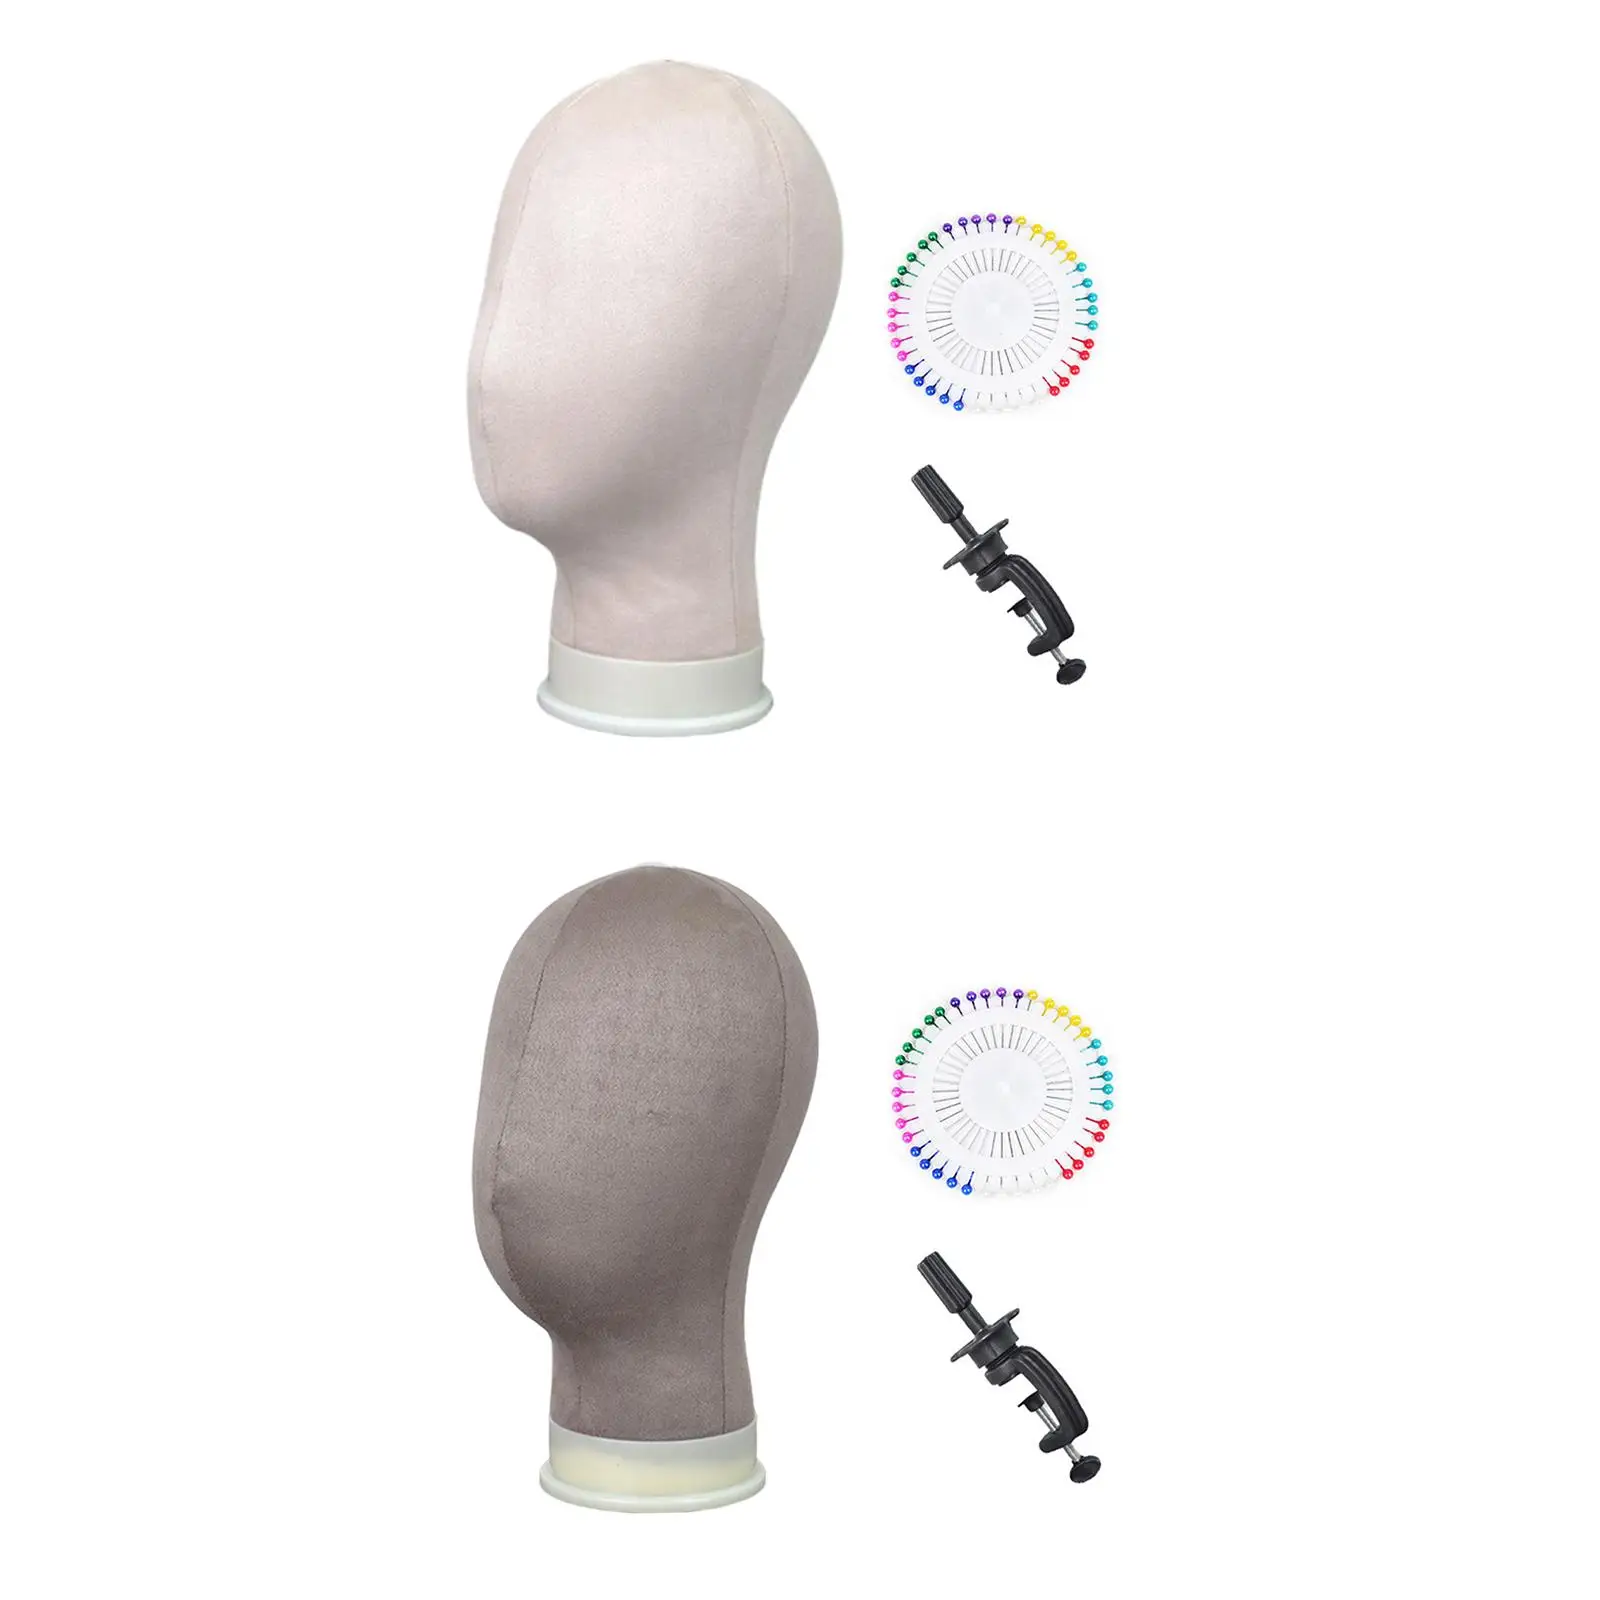 Professional Wig Head with Table Clamp Stand Salon Use Display Mannequin Head for Glasses Caps Making Wig Drying Styling